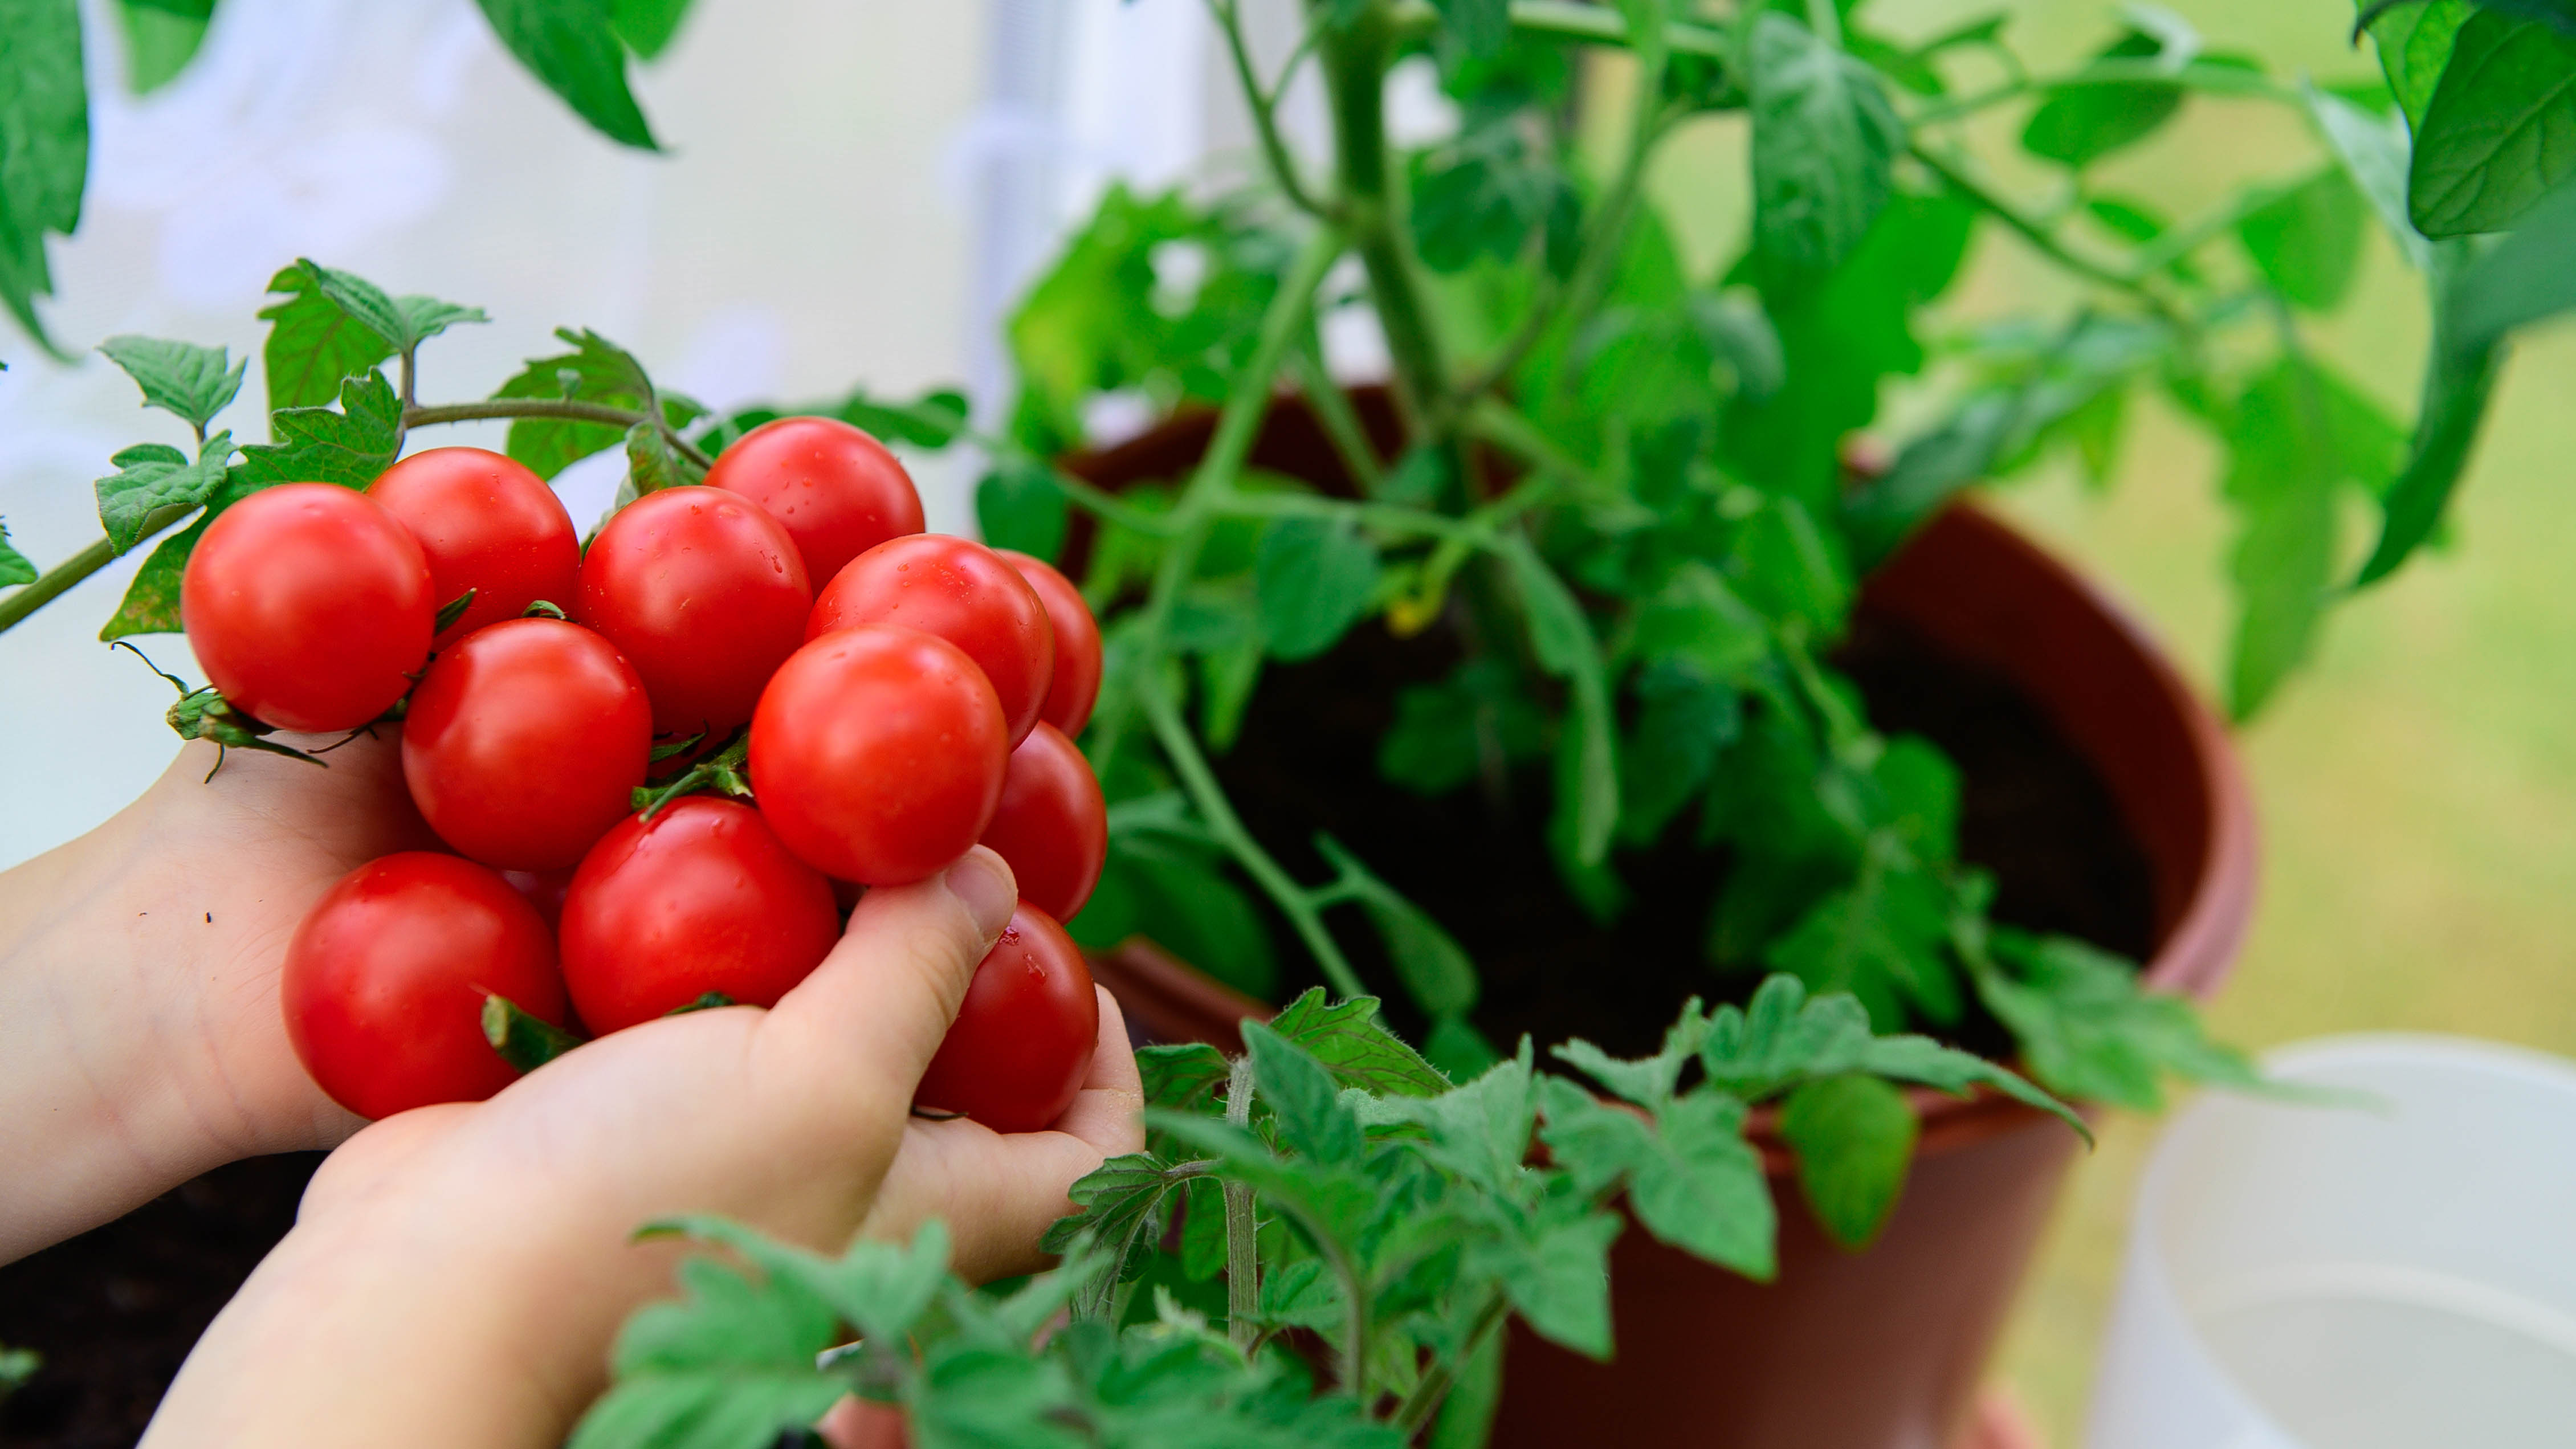 holding a home grown tomato plant